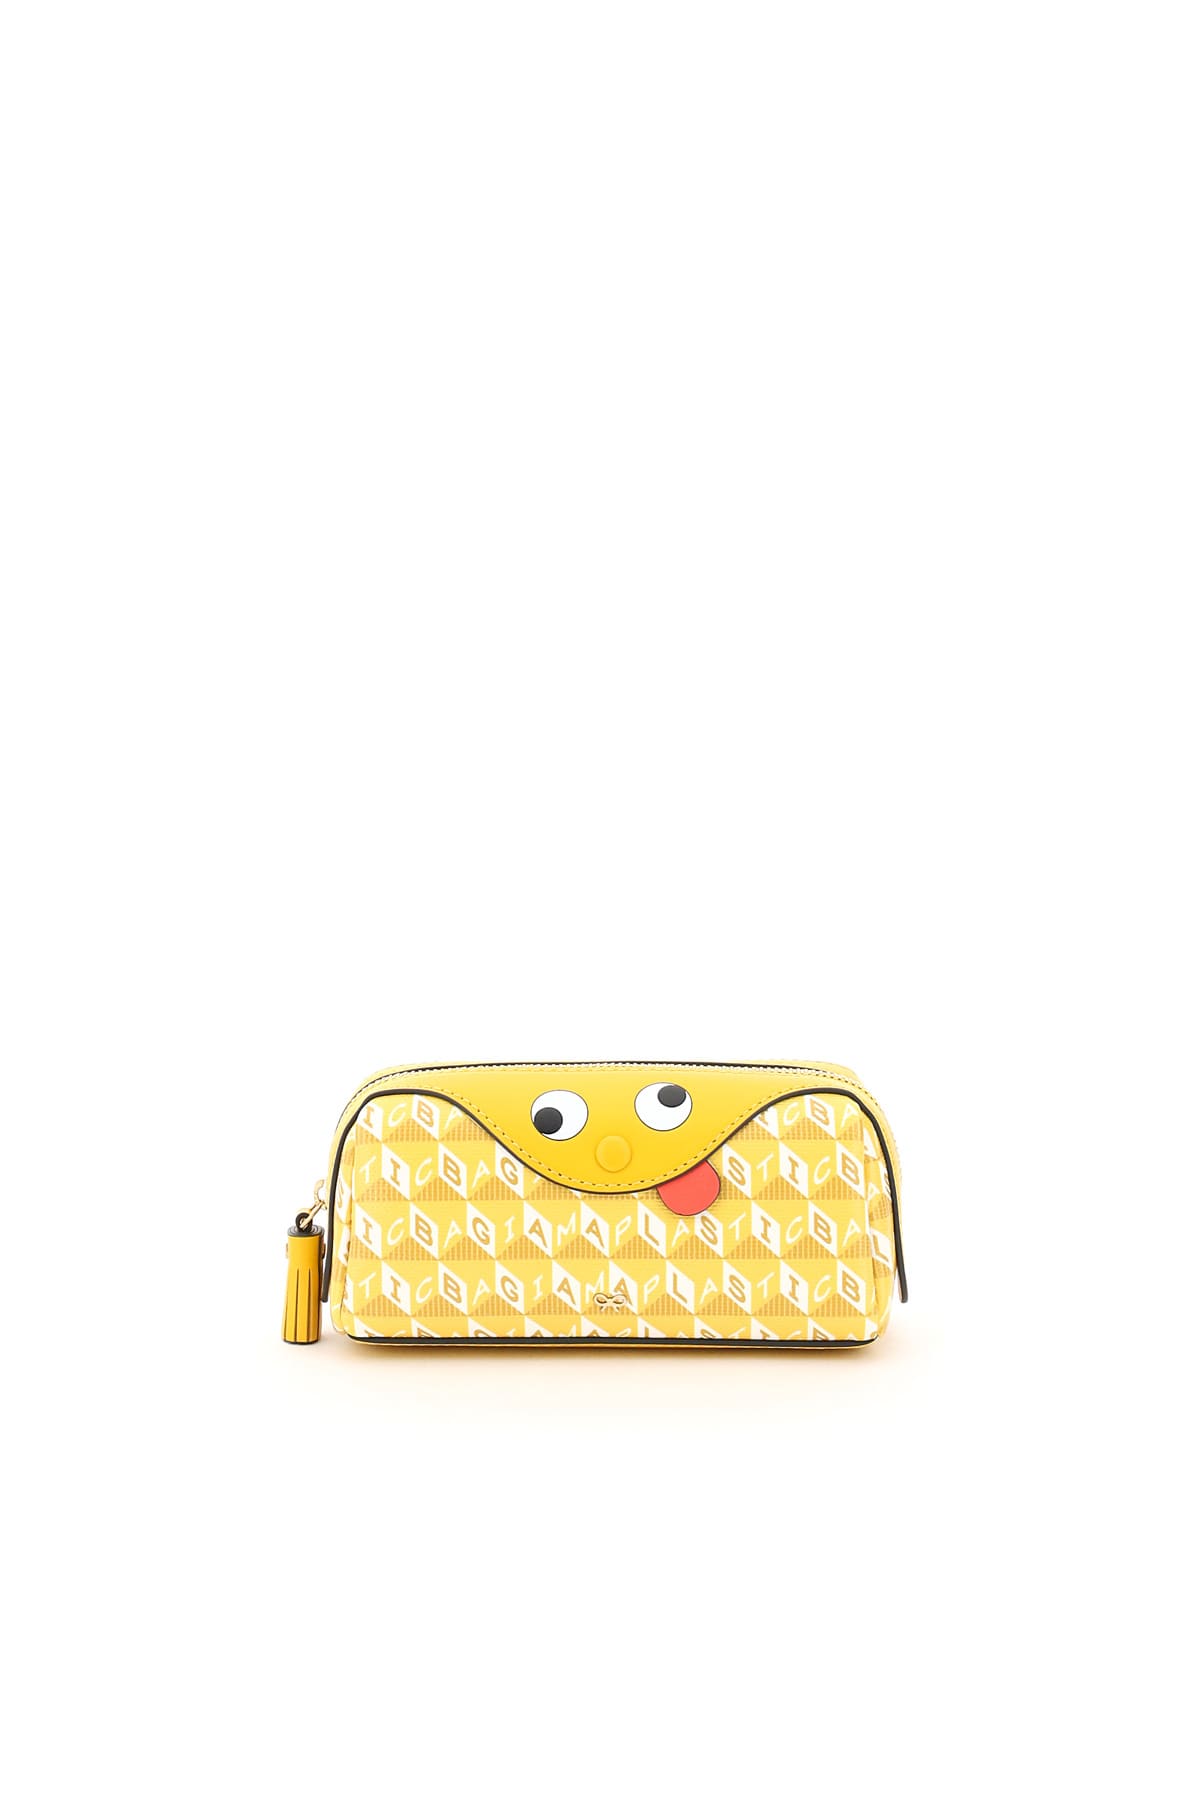 Anya Hindmarch I Am A Plastic Bag Zany Girlie Stuff Pouch